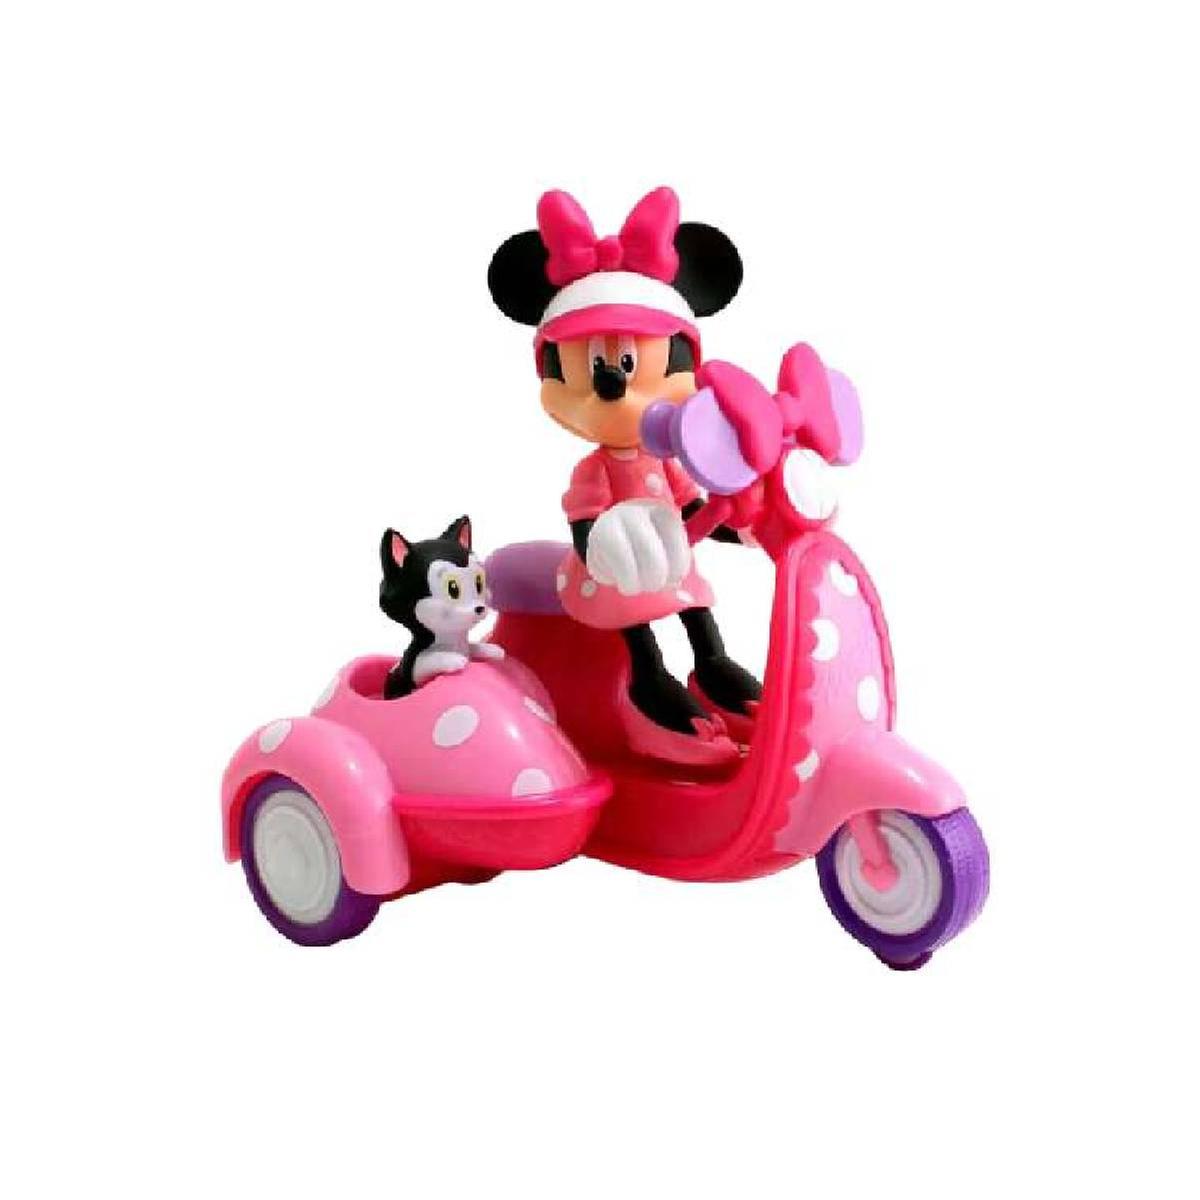 Minnie Mouse - RC Scooter Minnie | Mickey Mouse y Amigos | Toys"R"Us España